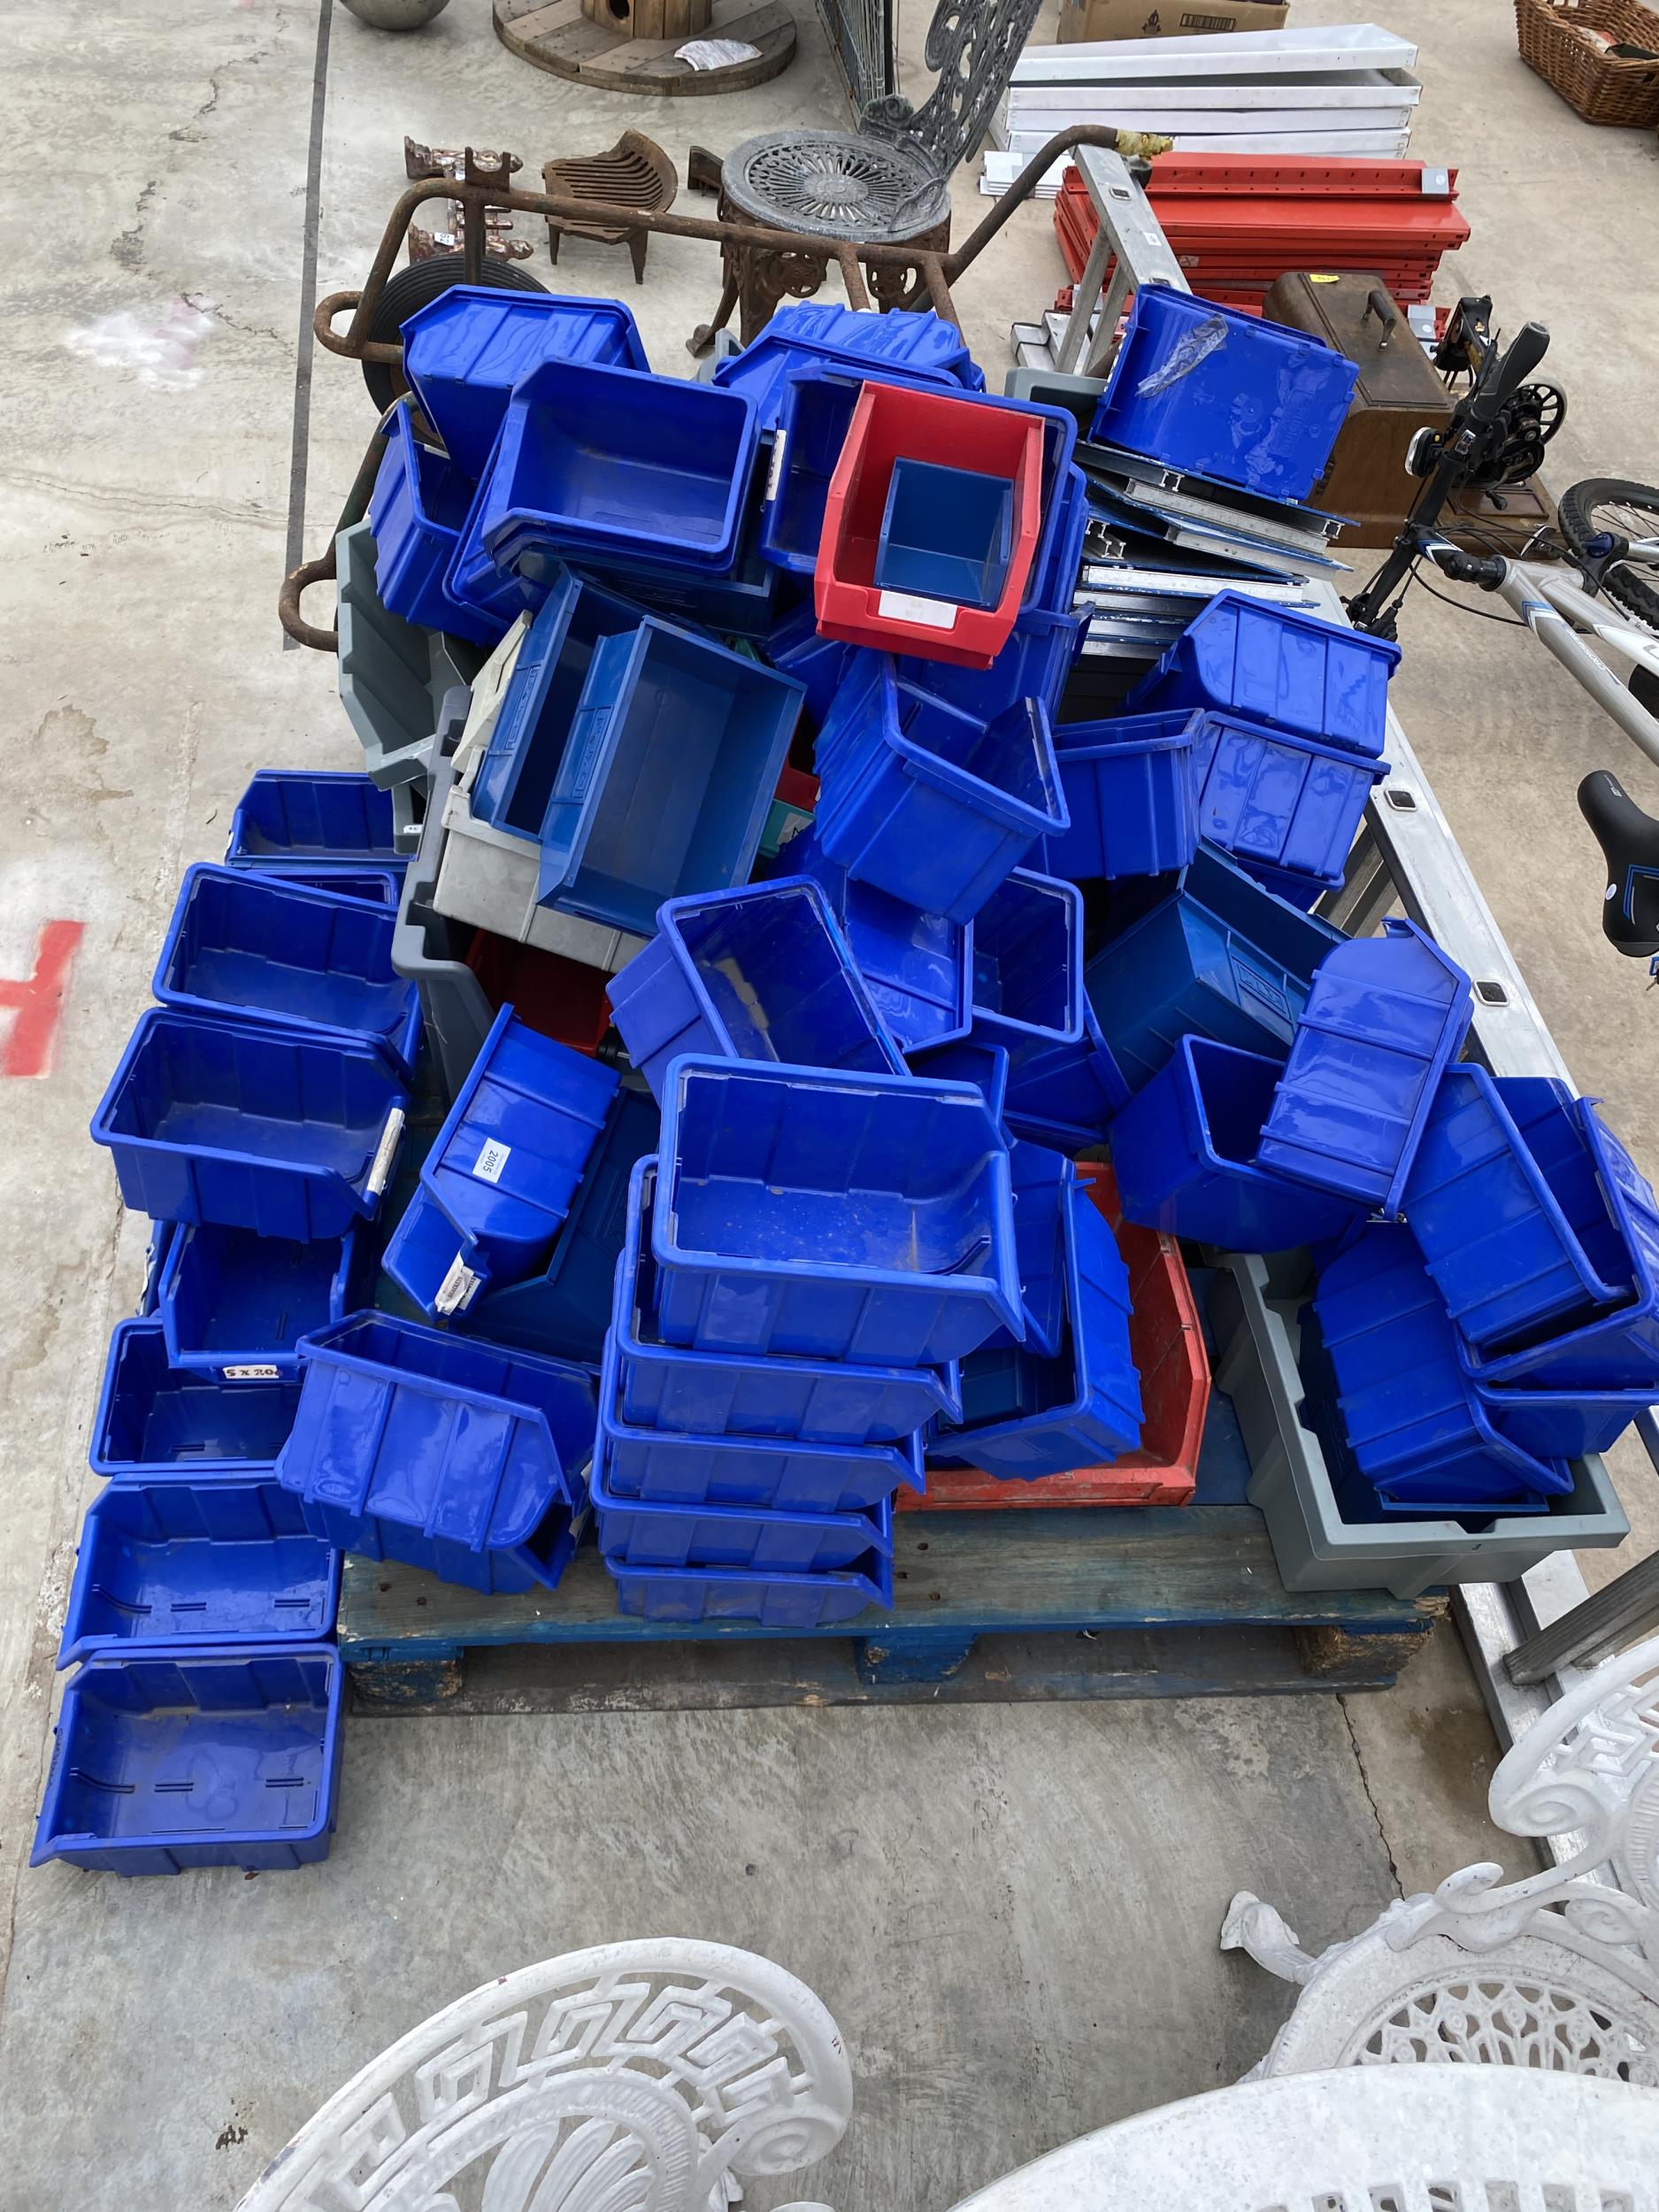 A VERY LARGE COLLECTION OF PLASTIC HARDWARE STORAGE LIN BINS - Image 2 of 3